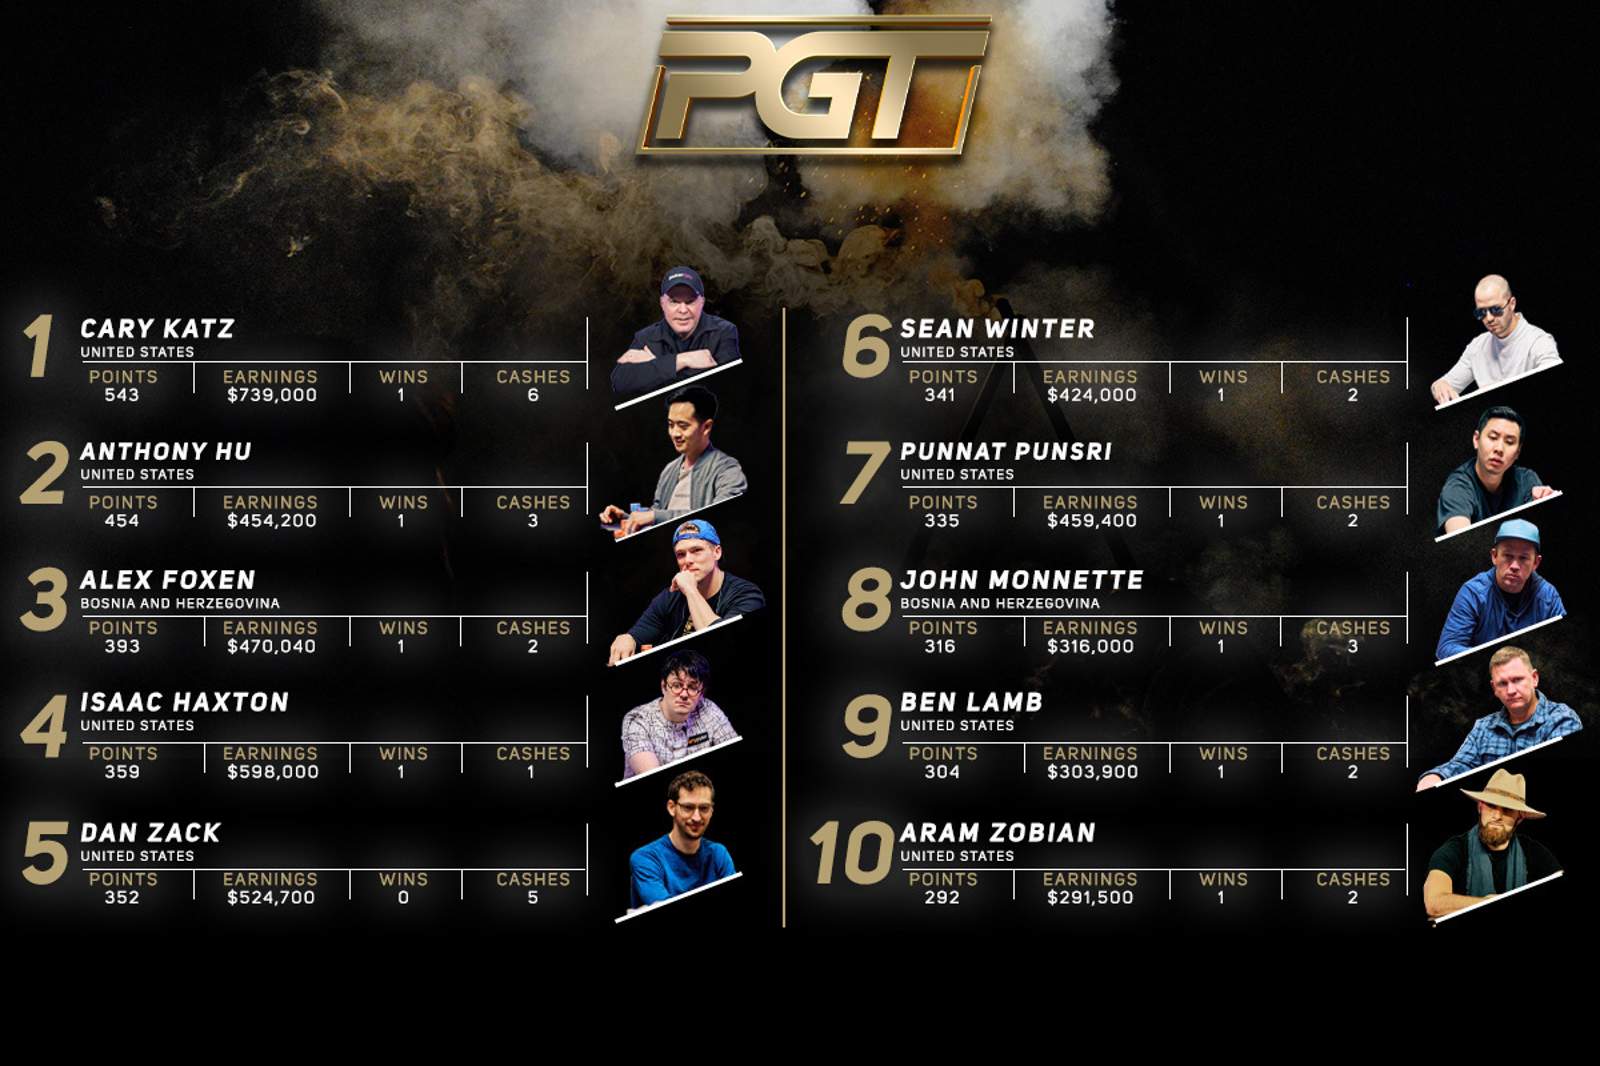 Cary Katz On Top of PGT Leaderboard; Dan Zack Climbs to 5th